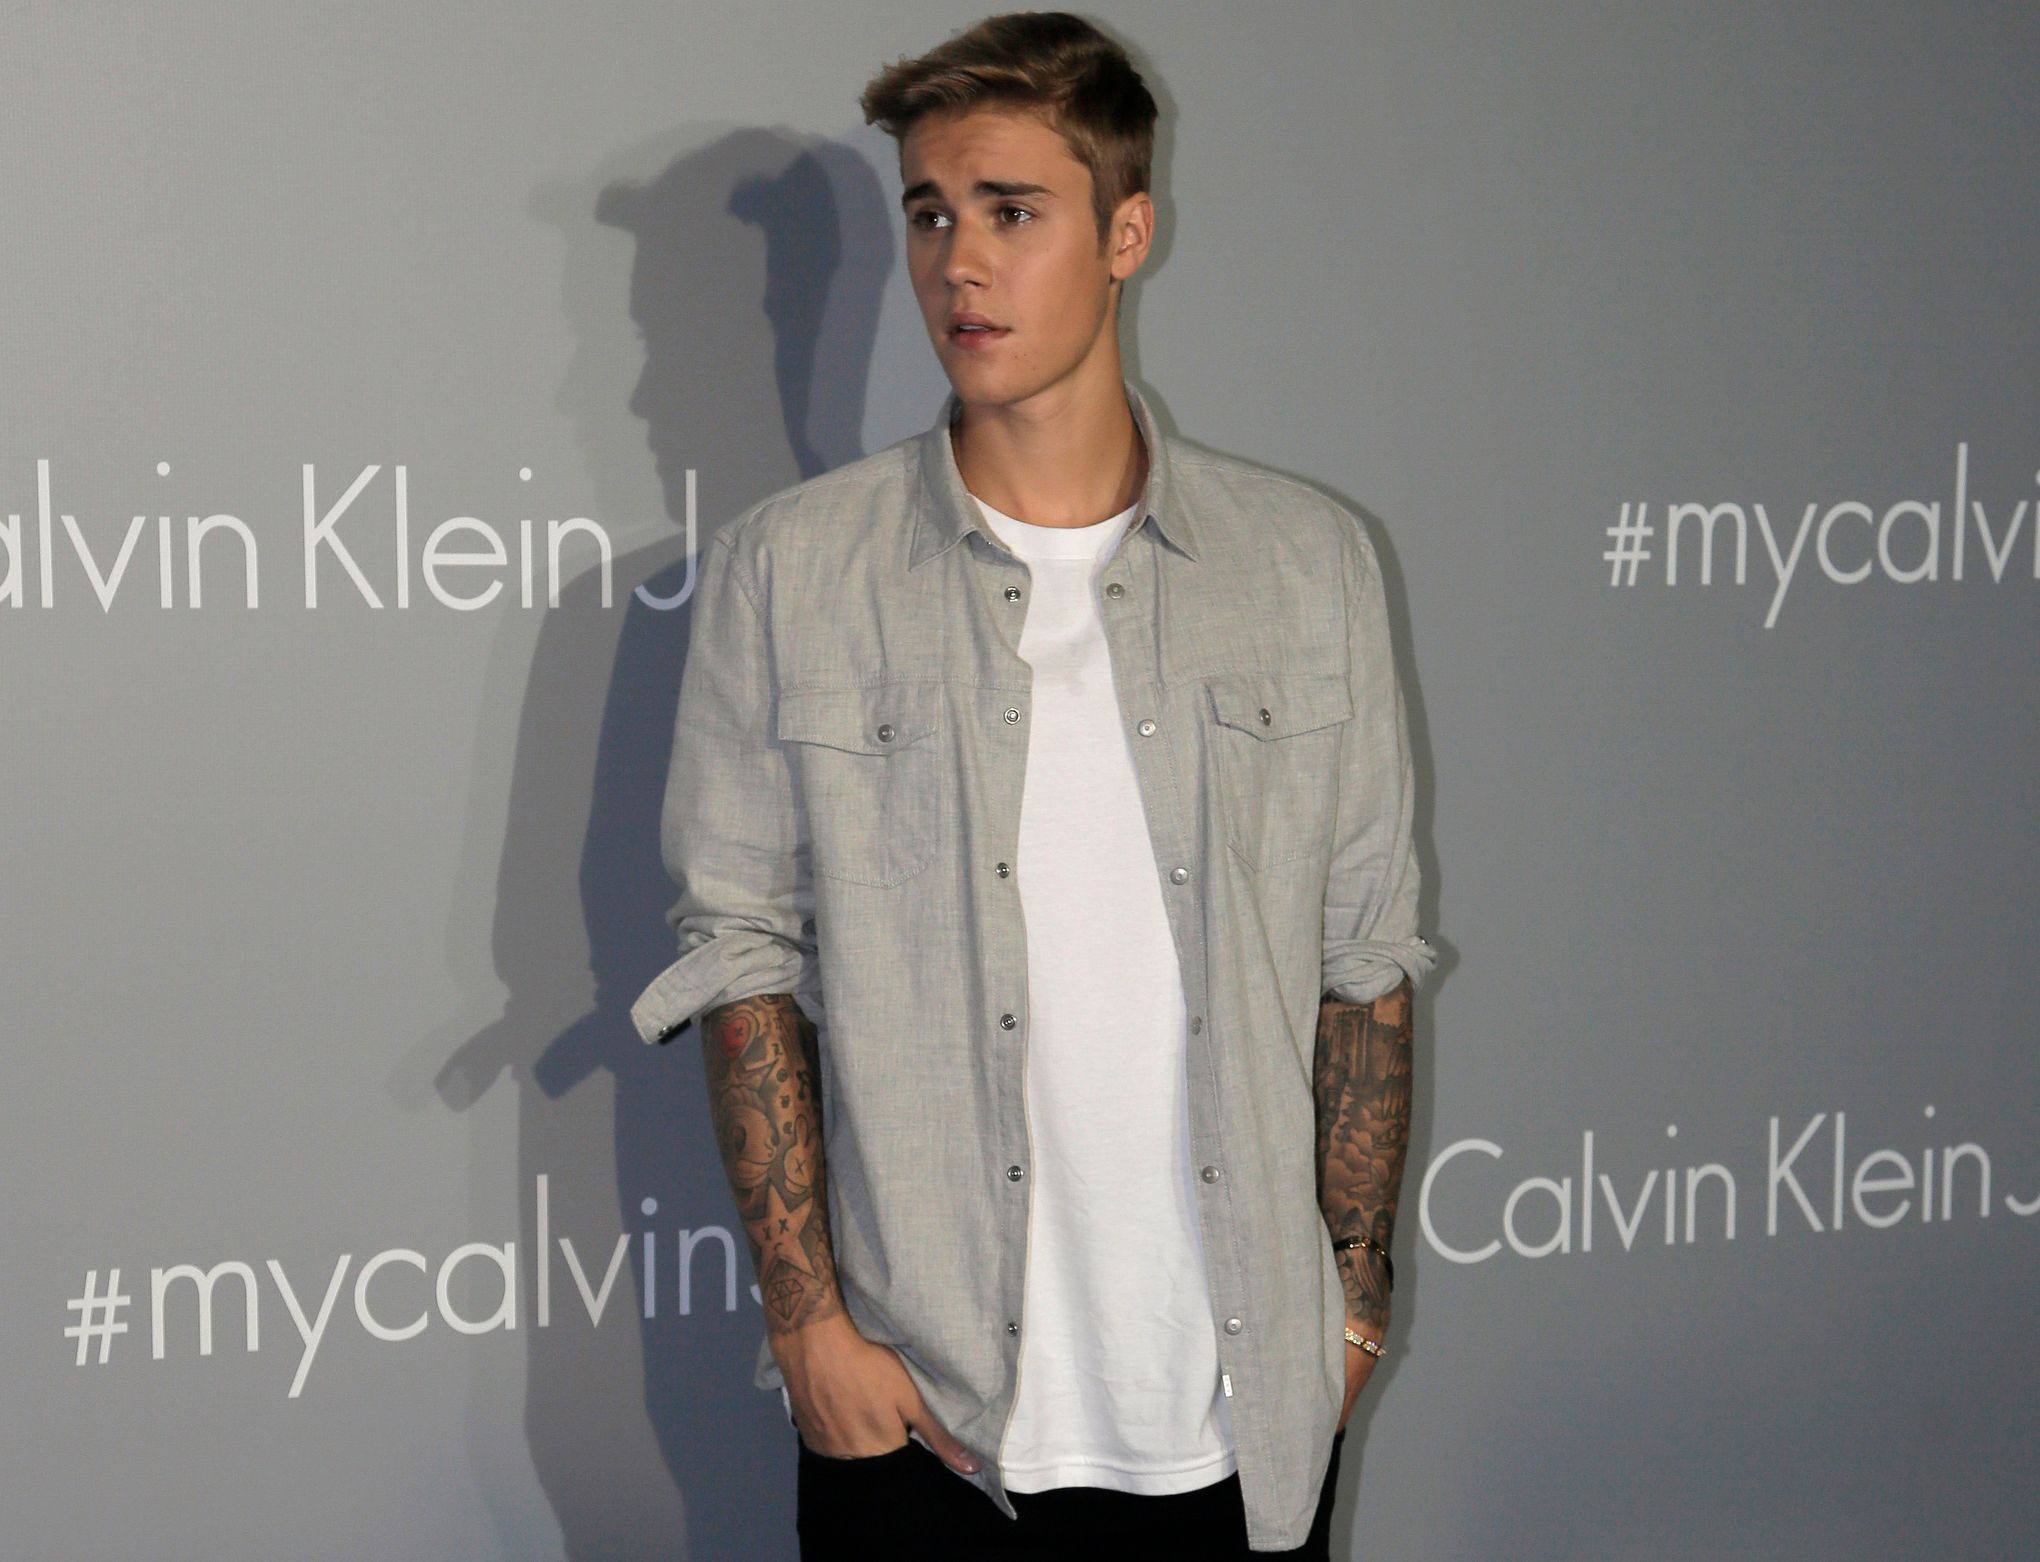 Justin Bieber Hillsong Church: Five Things to Know